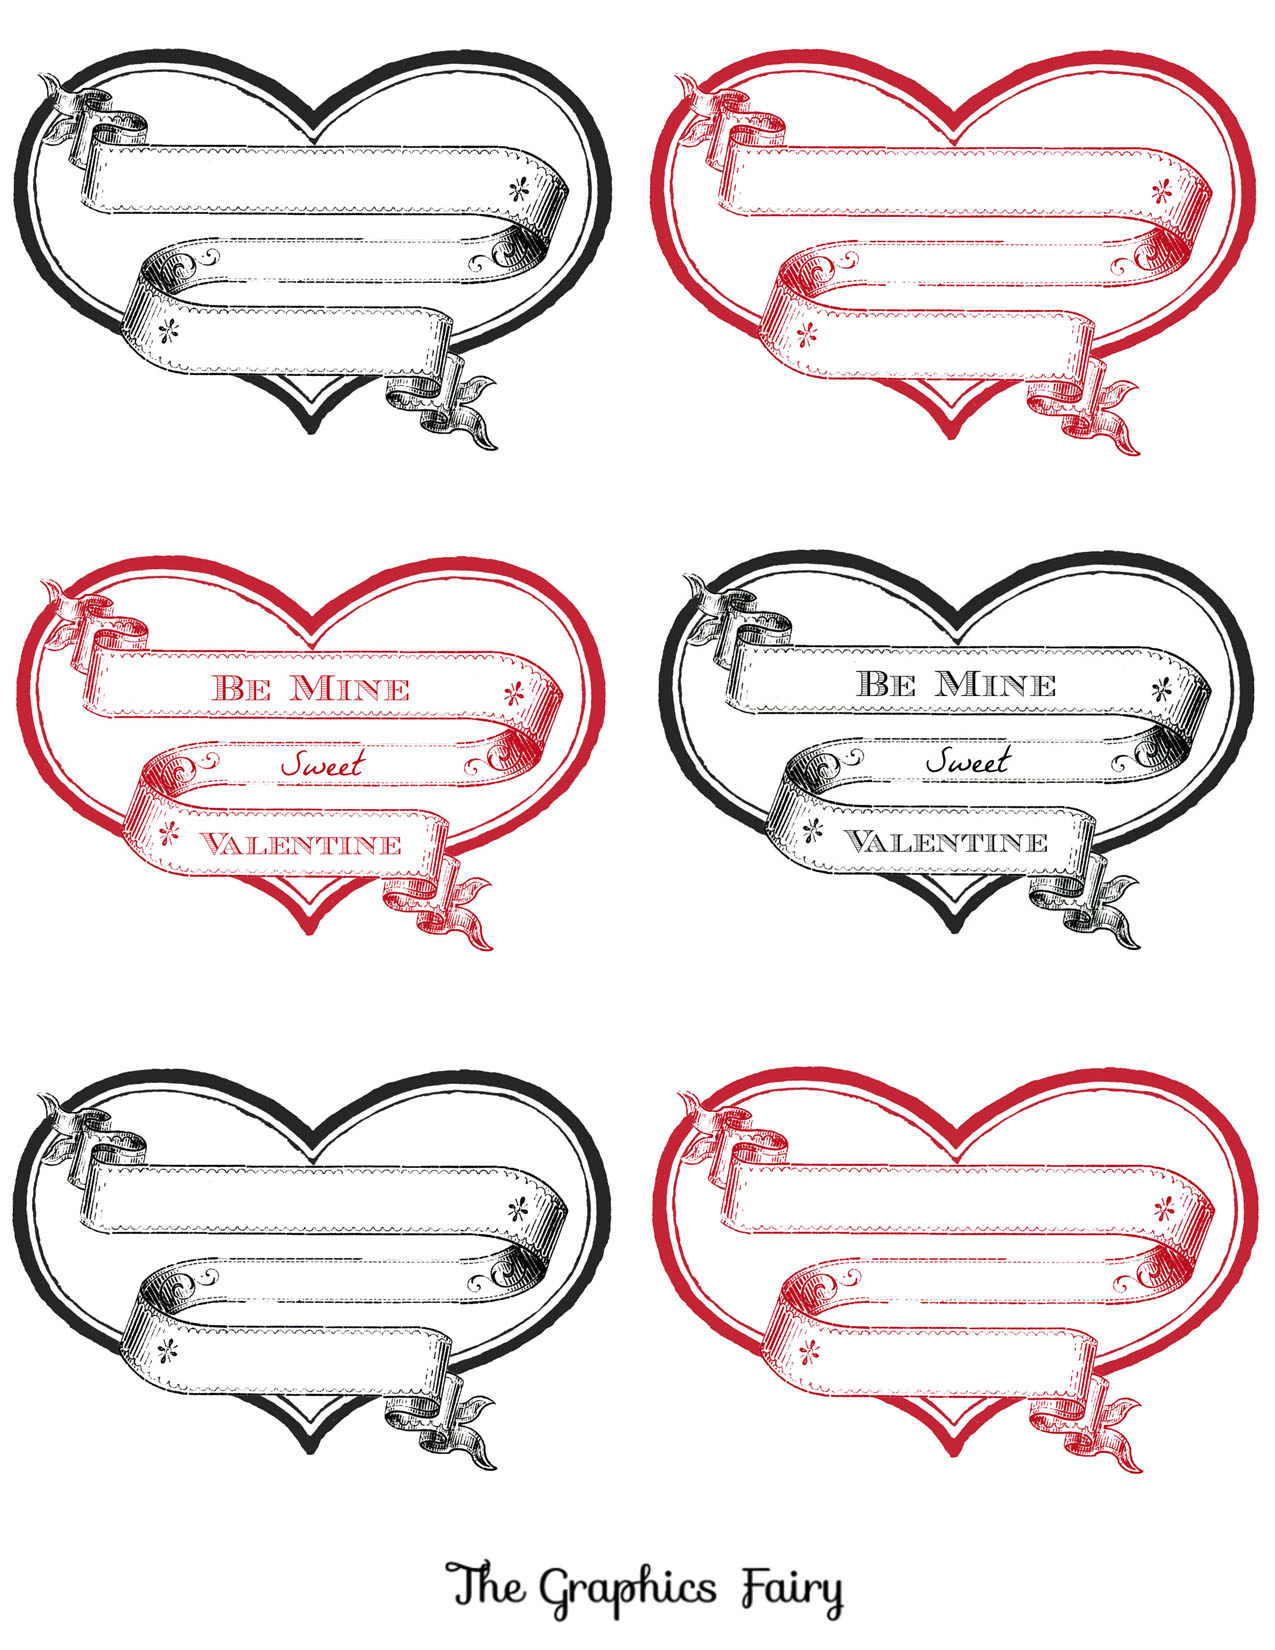 12 Printable Valentine Heart Images! - The Graphics Fairy with Free Printable Heart Labels